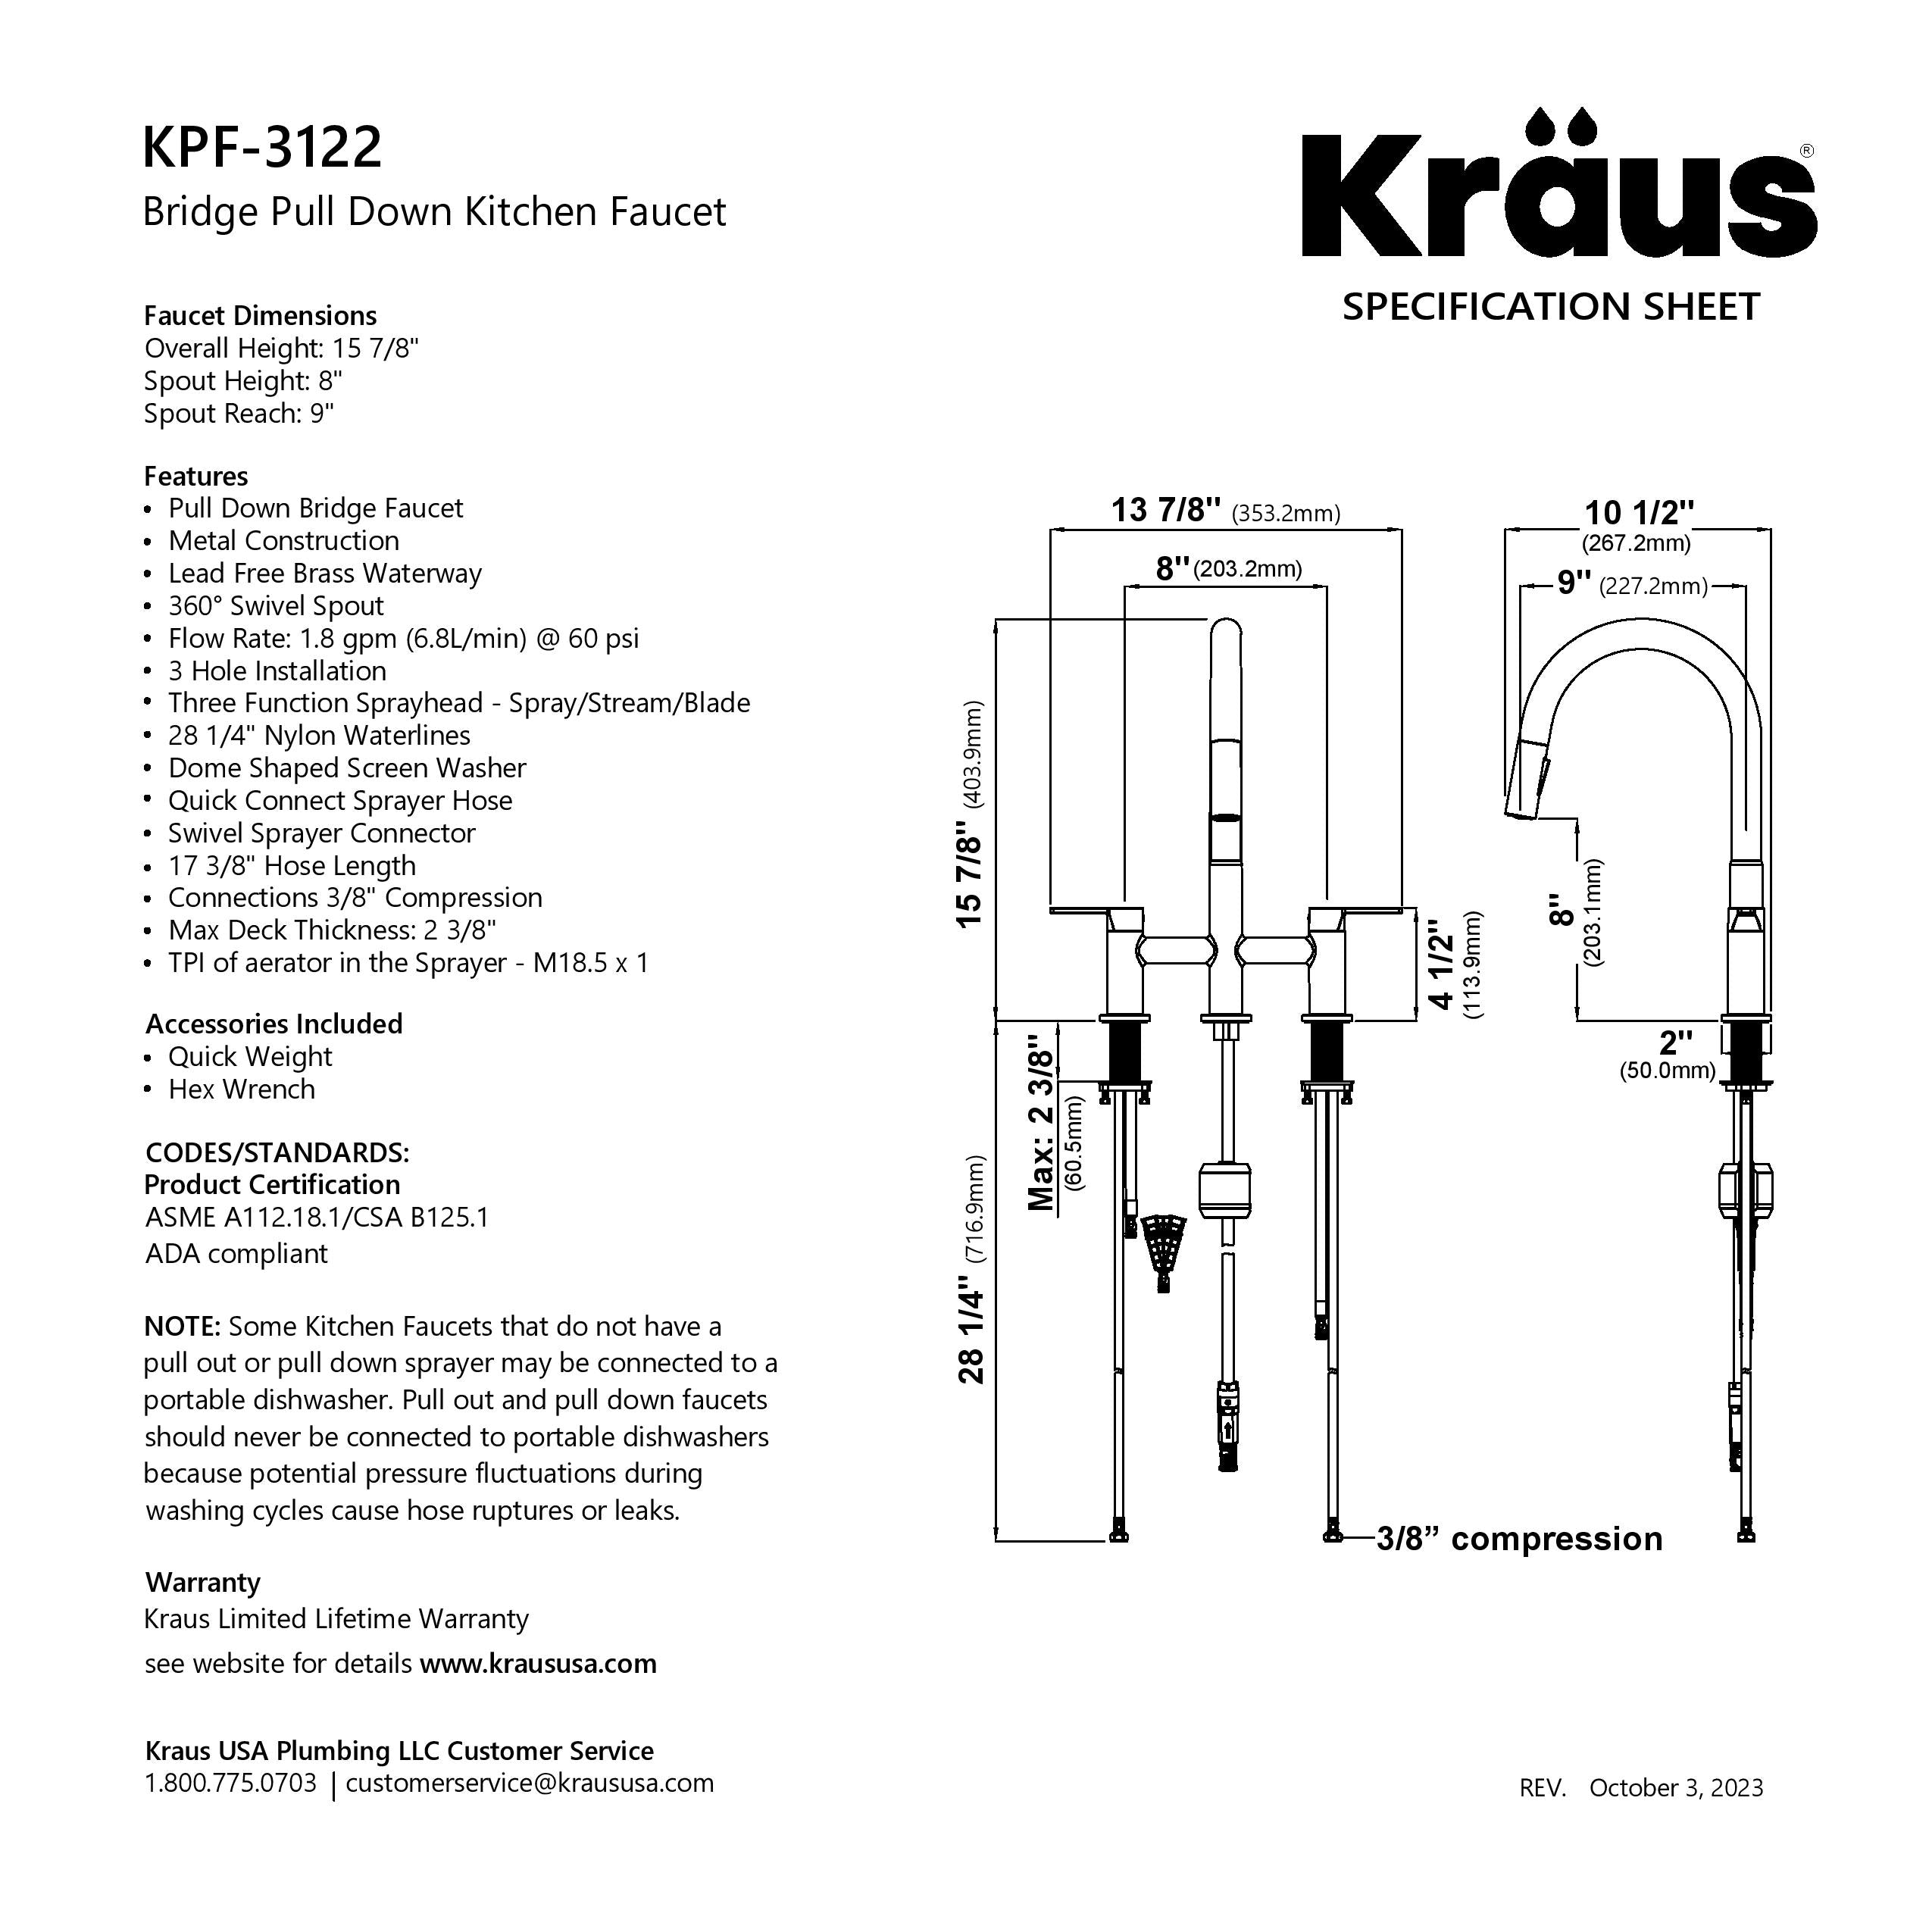 KRAUS Contemporary Bridge Kitchen Faucet with Spray-Head in Spot-Free Stainless